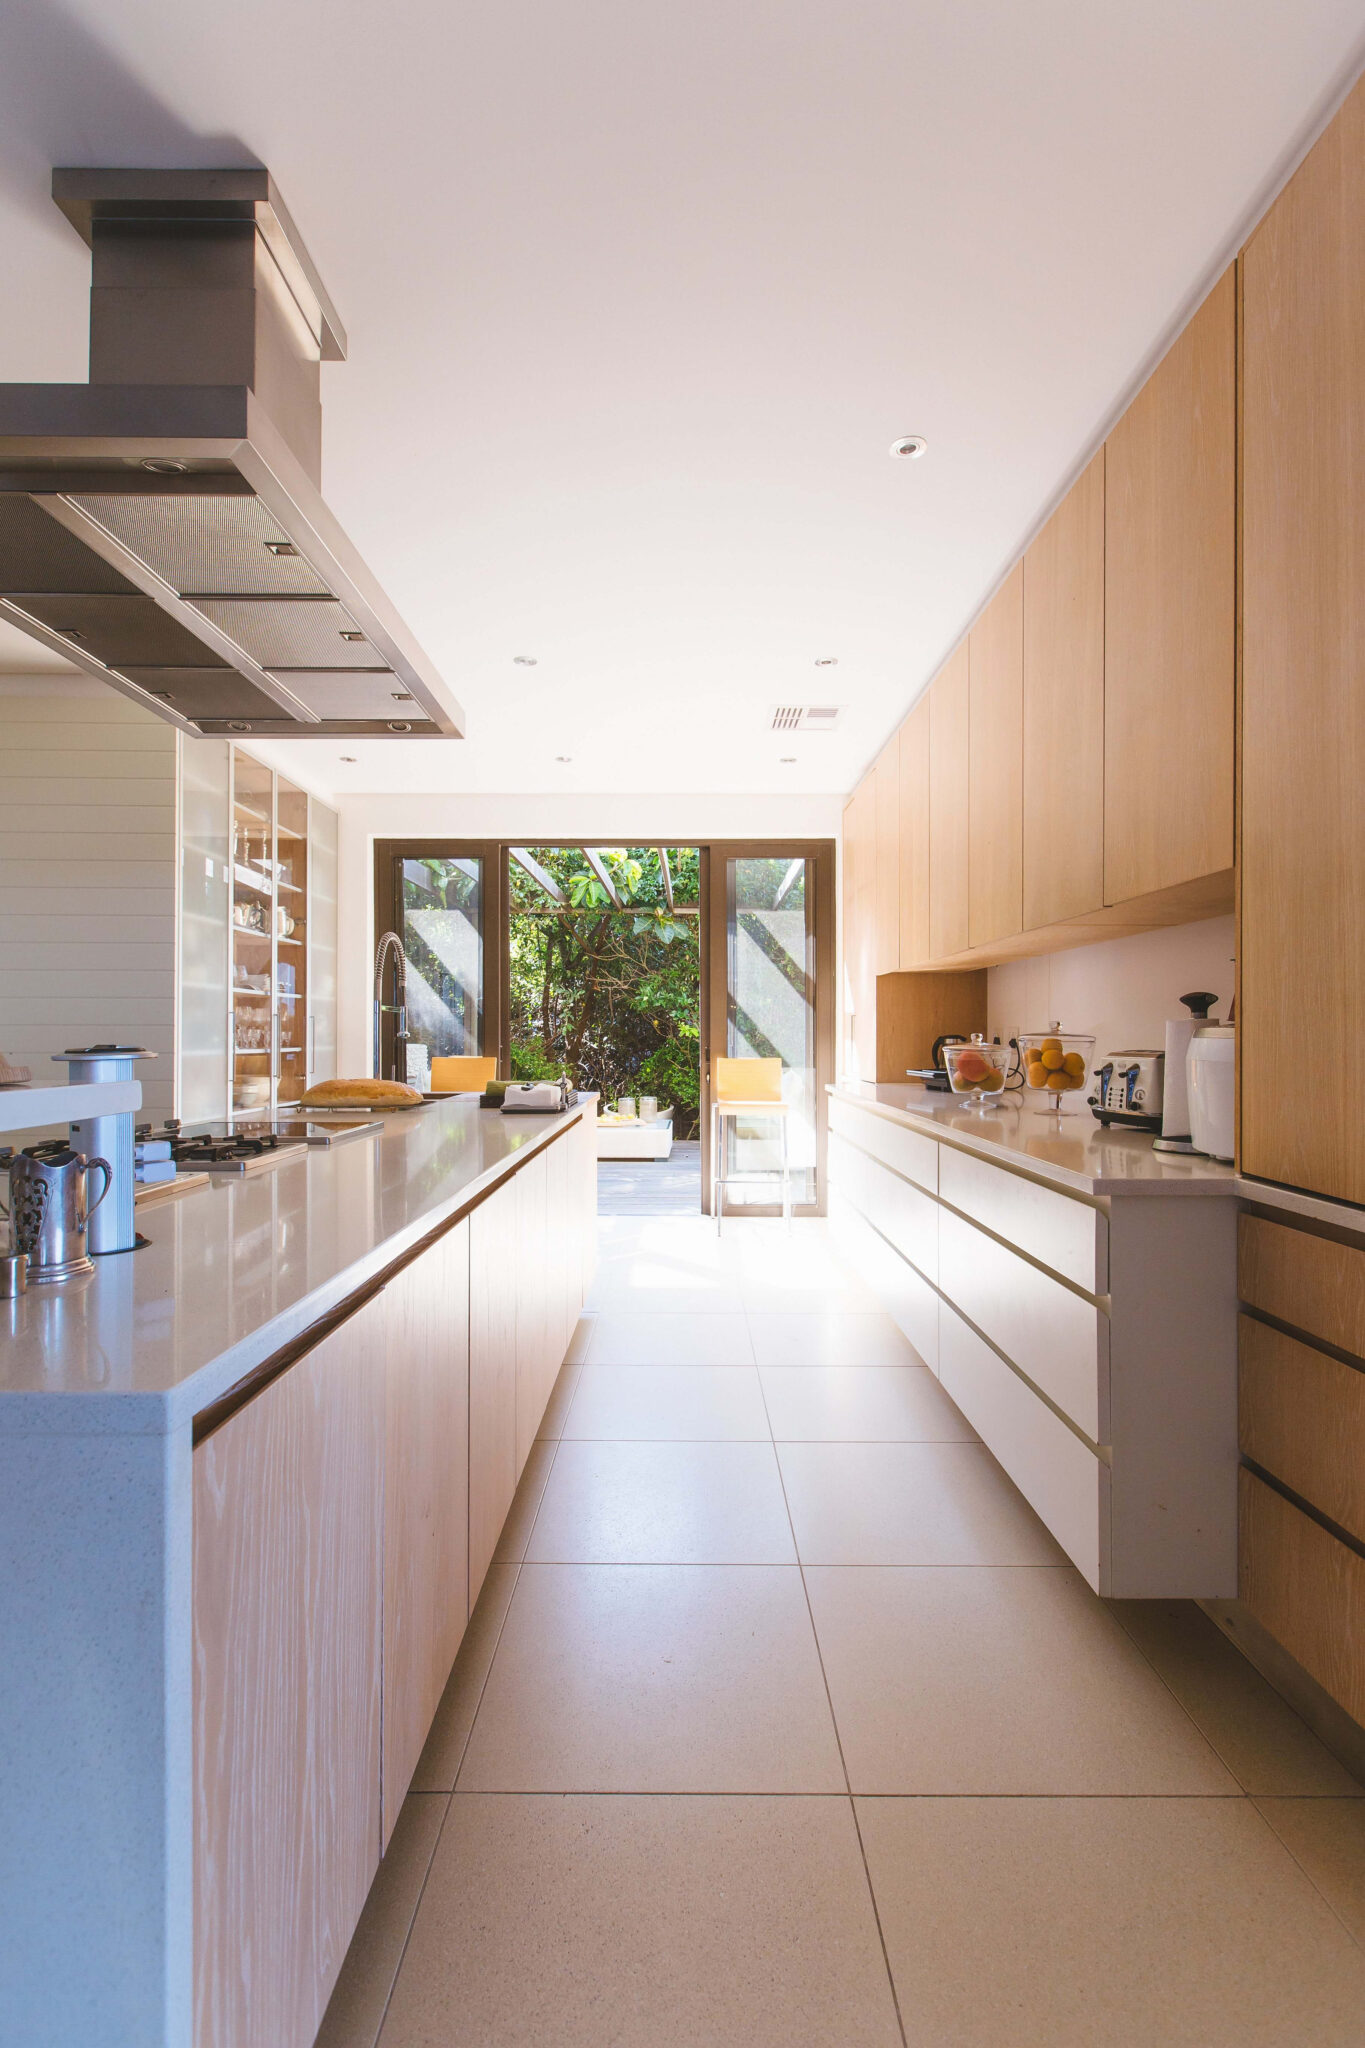 The Pros and Cons of a Kitchen Pass-Through